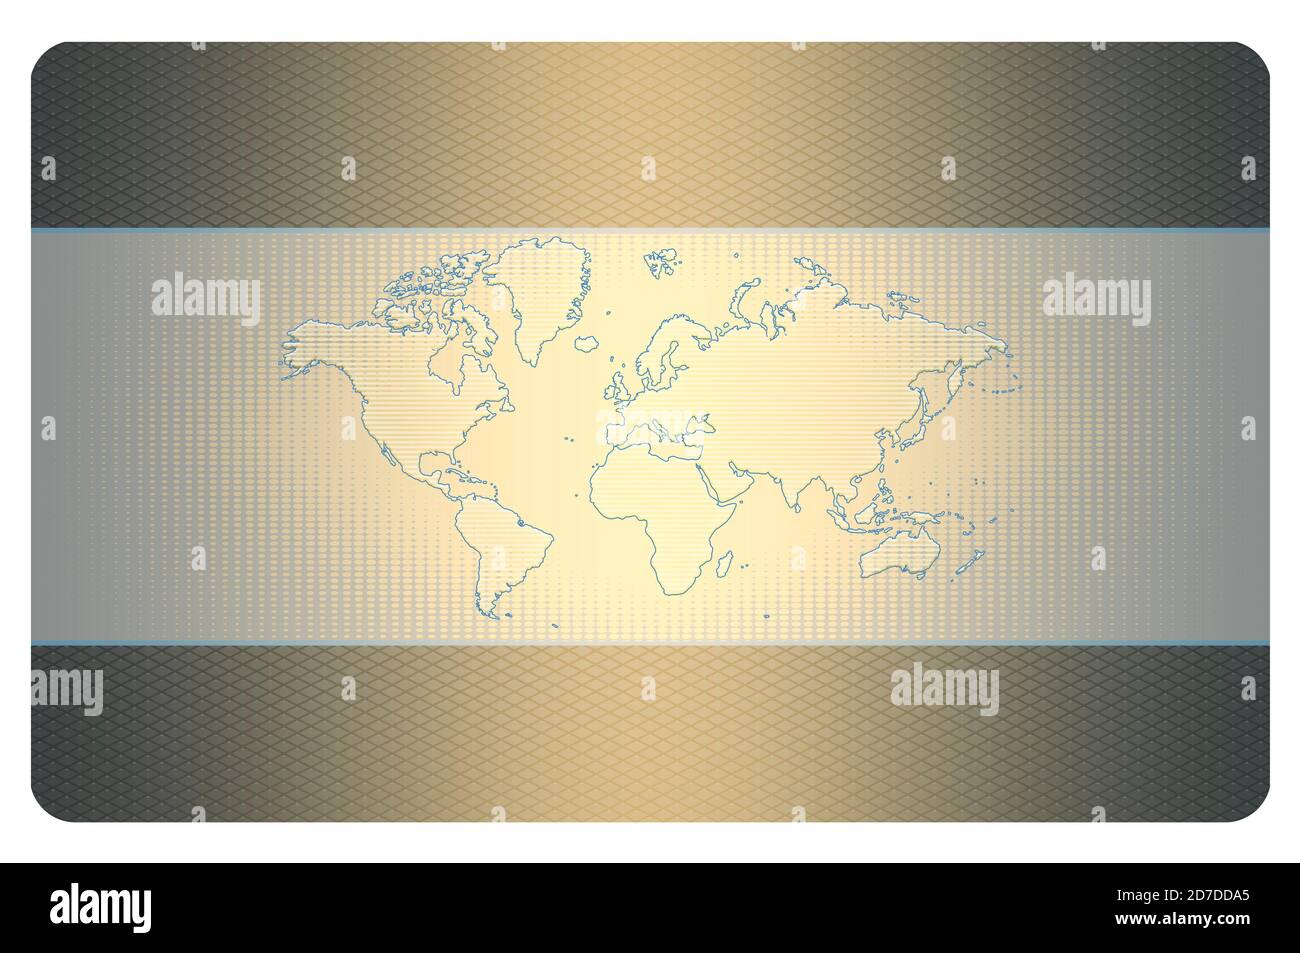 Background with world map for business card design. Stock Photo